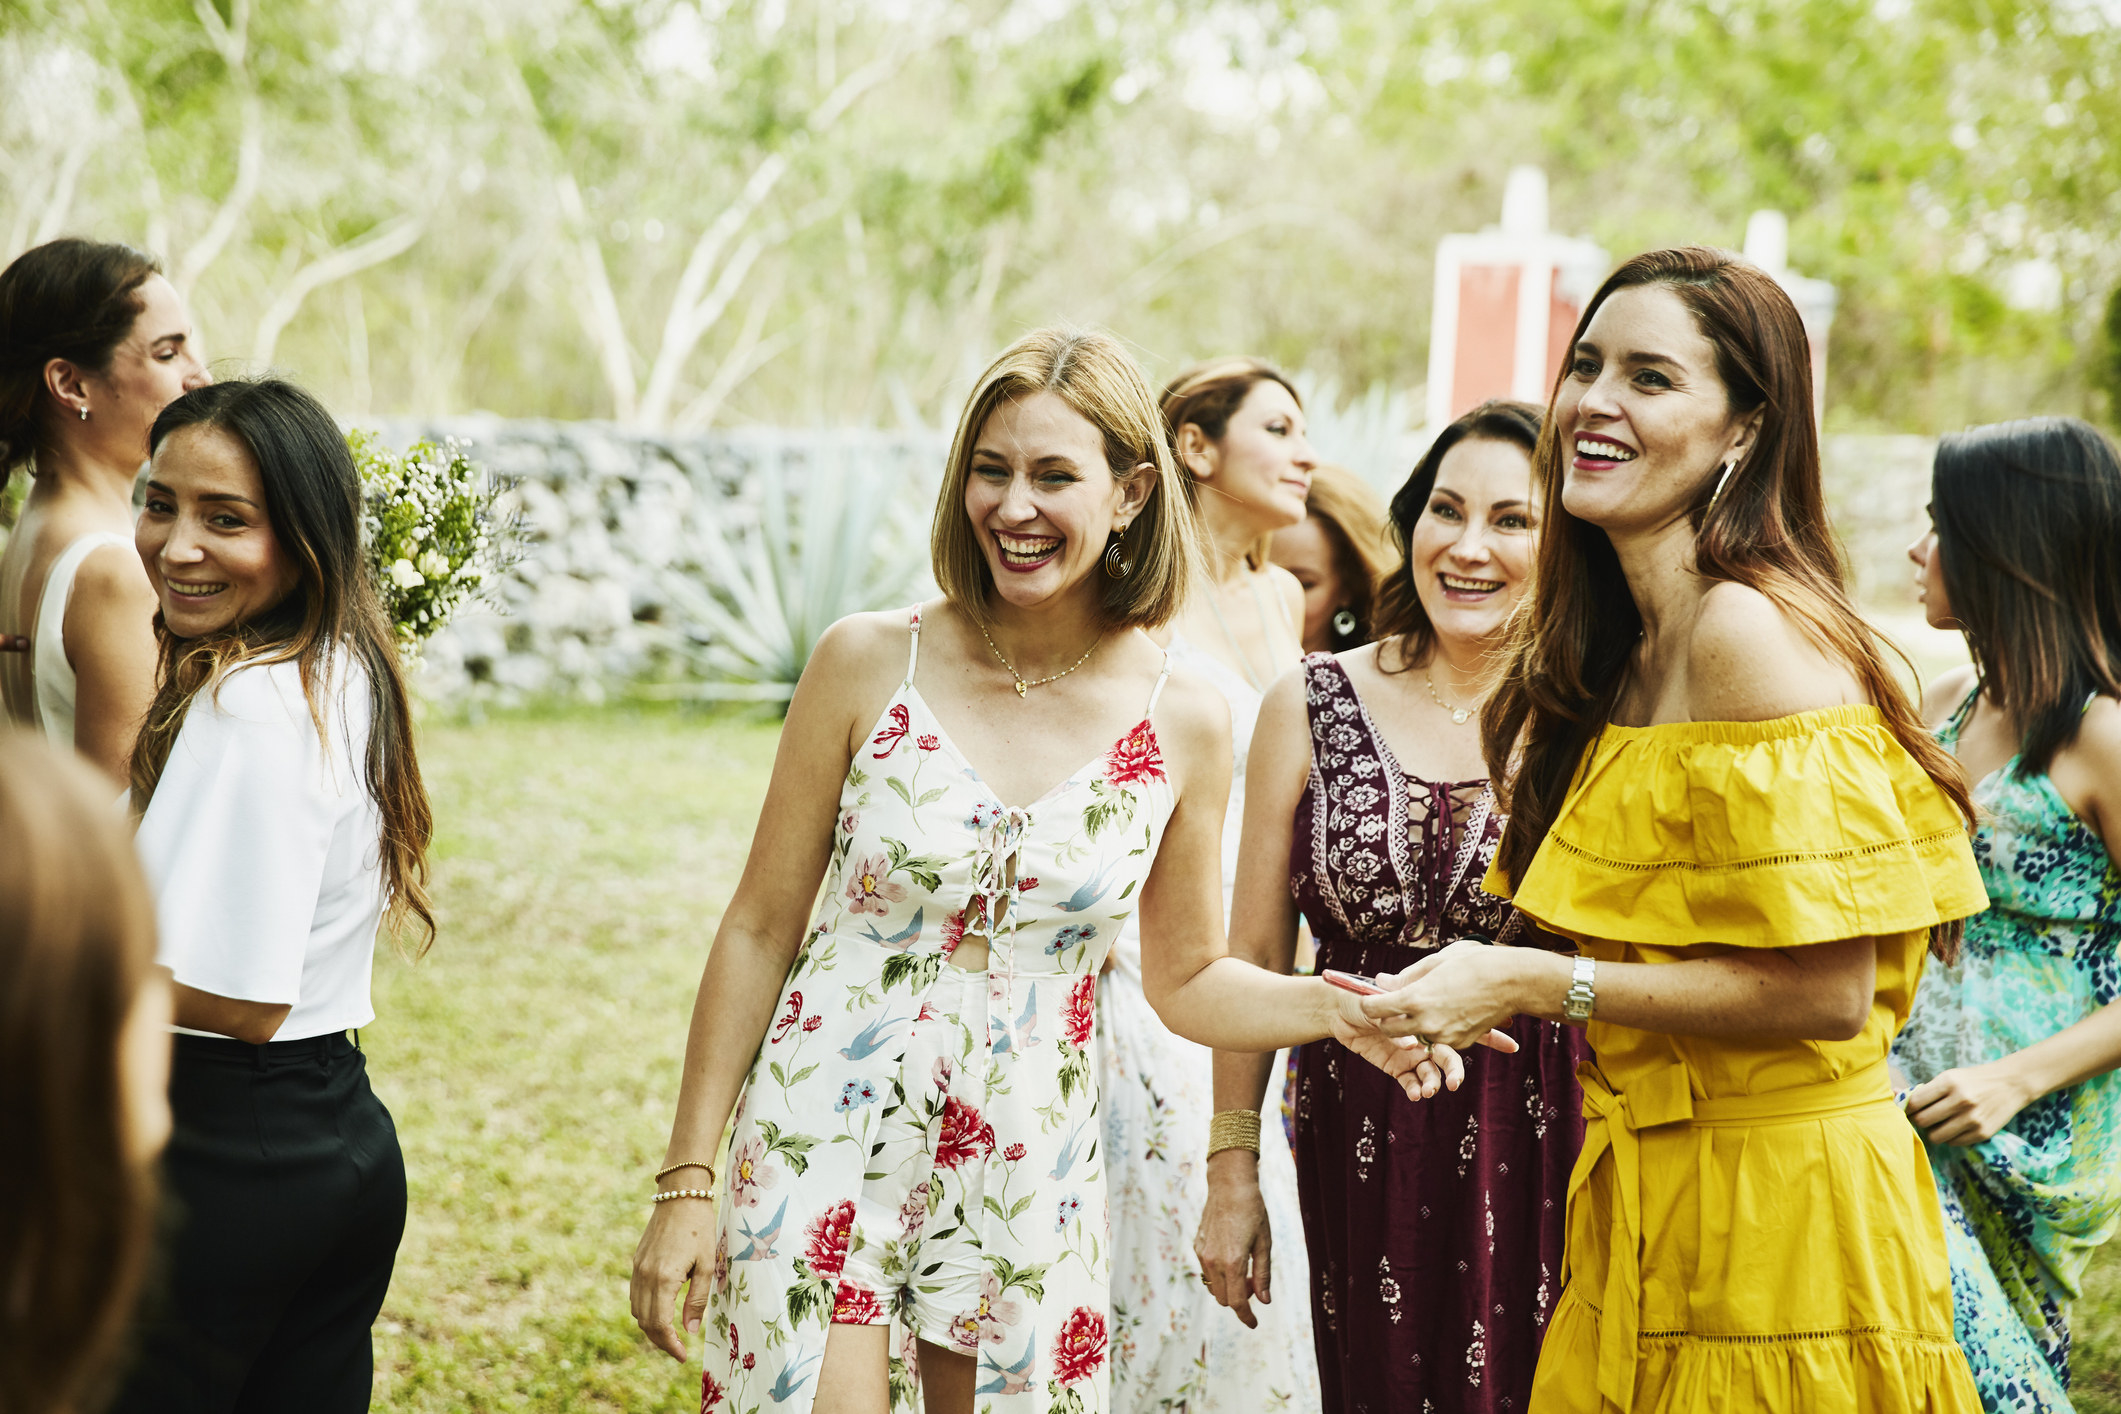 Several people at a wedding in summer dresses